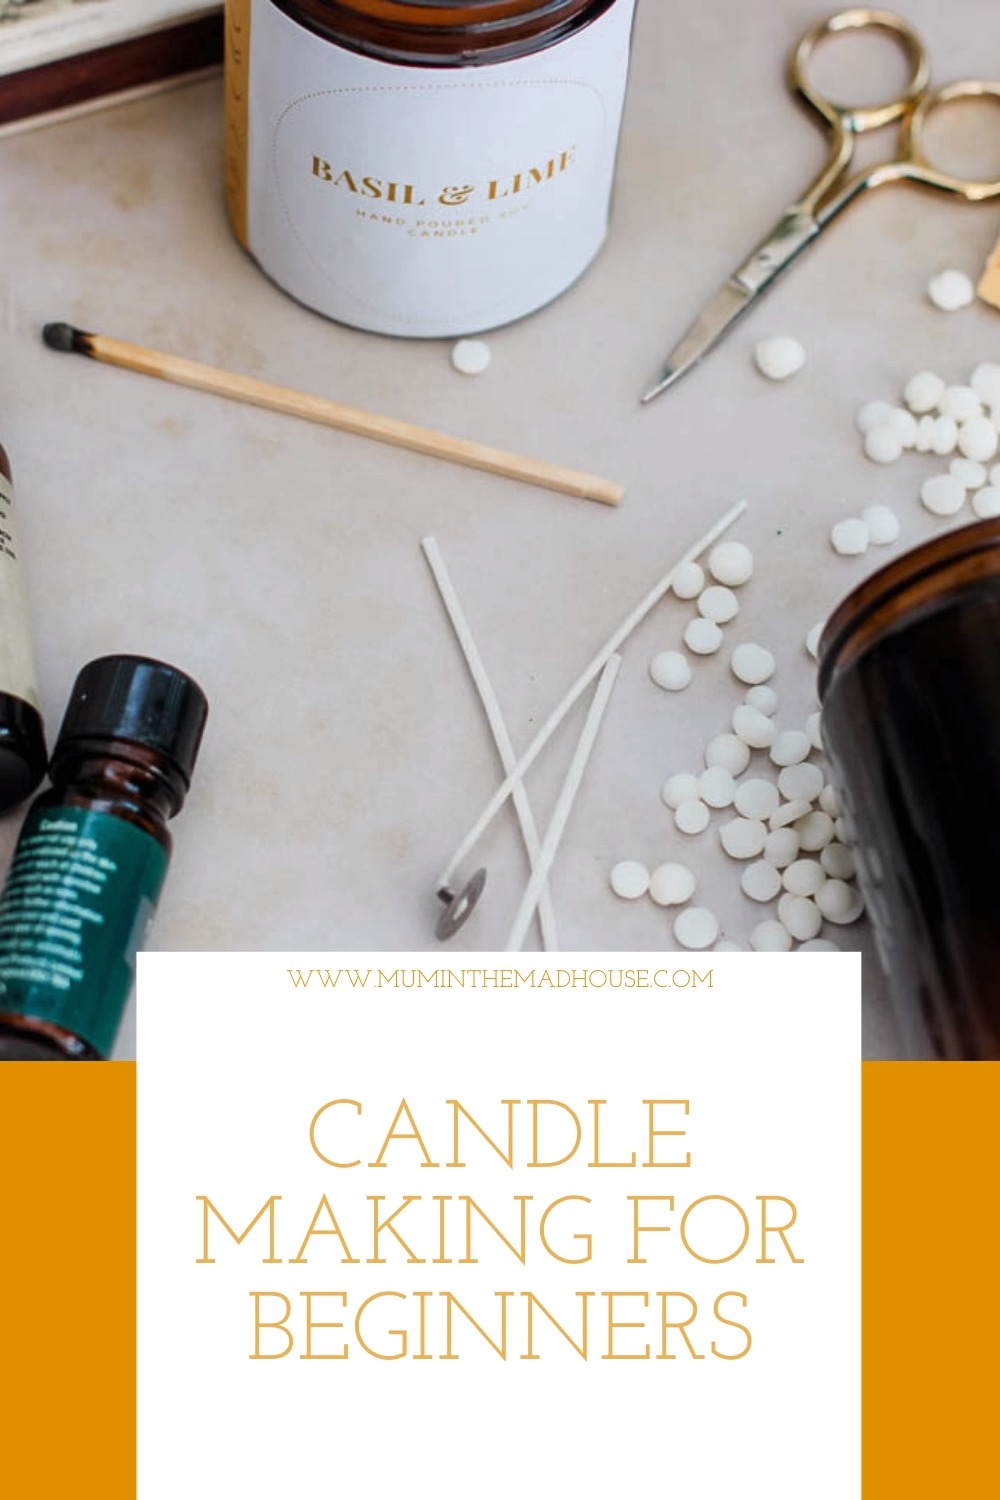 Ho to Make DIY Soy Wax Container Candles